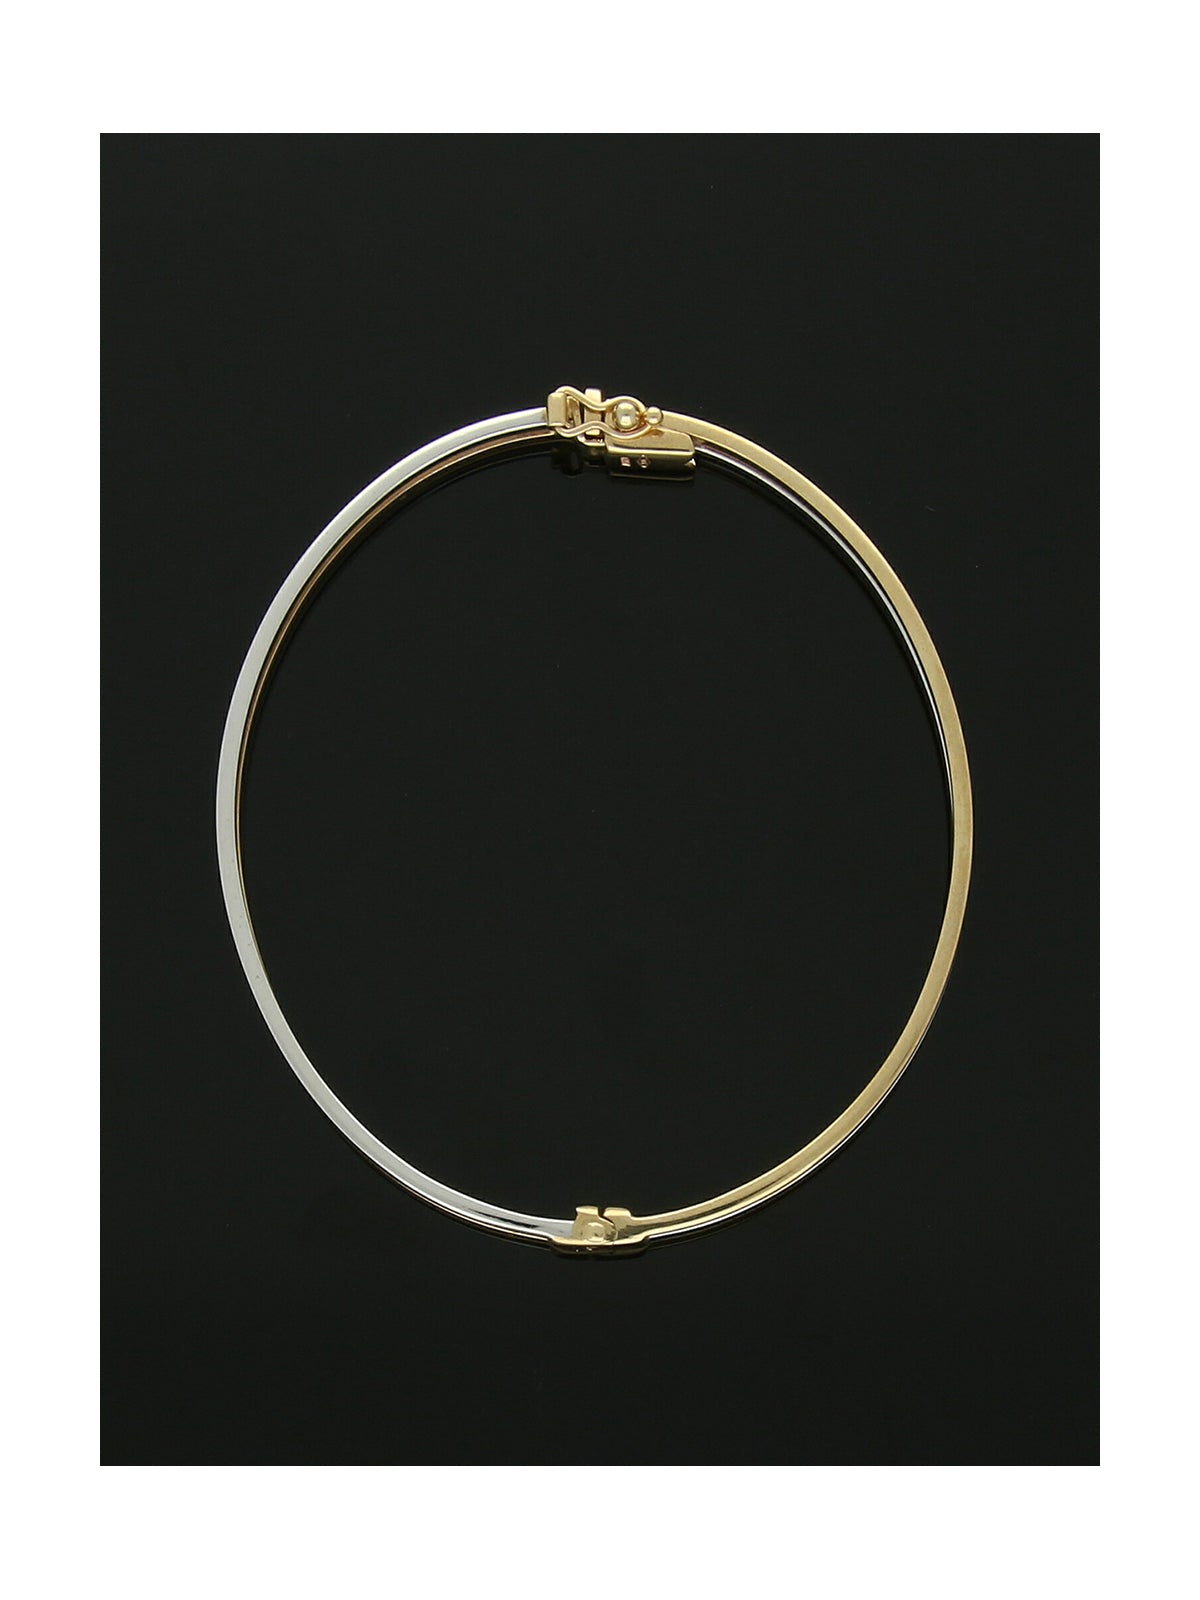 Open Twist Hinged Bangle in 9ct Yellow and White Gold